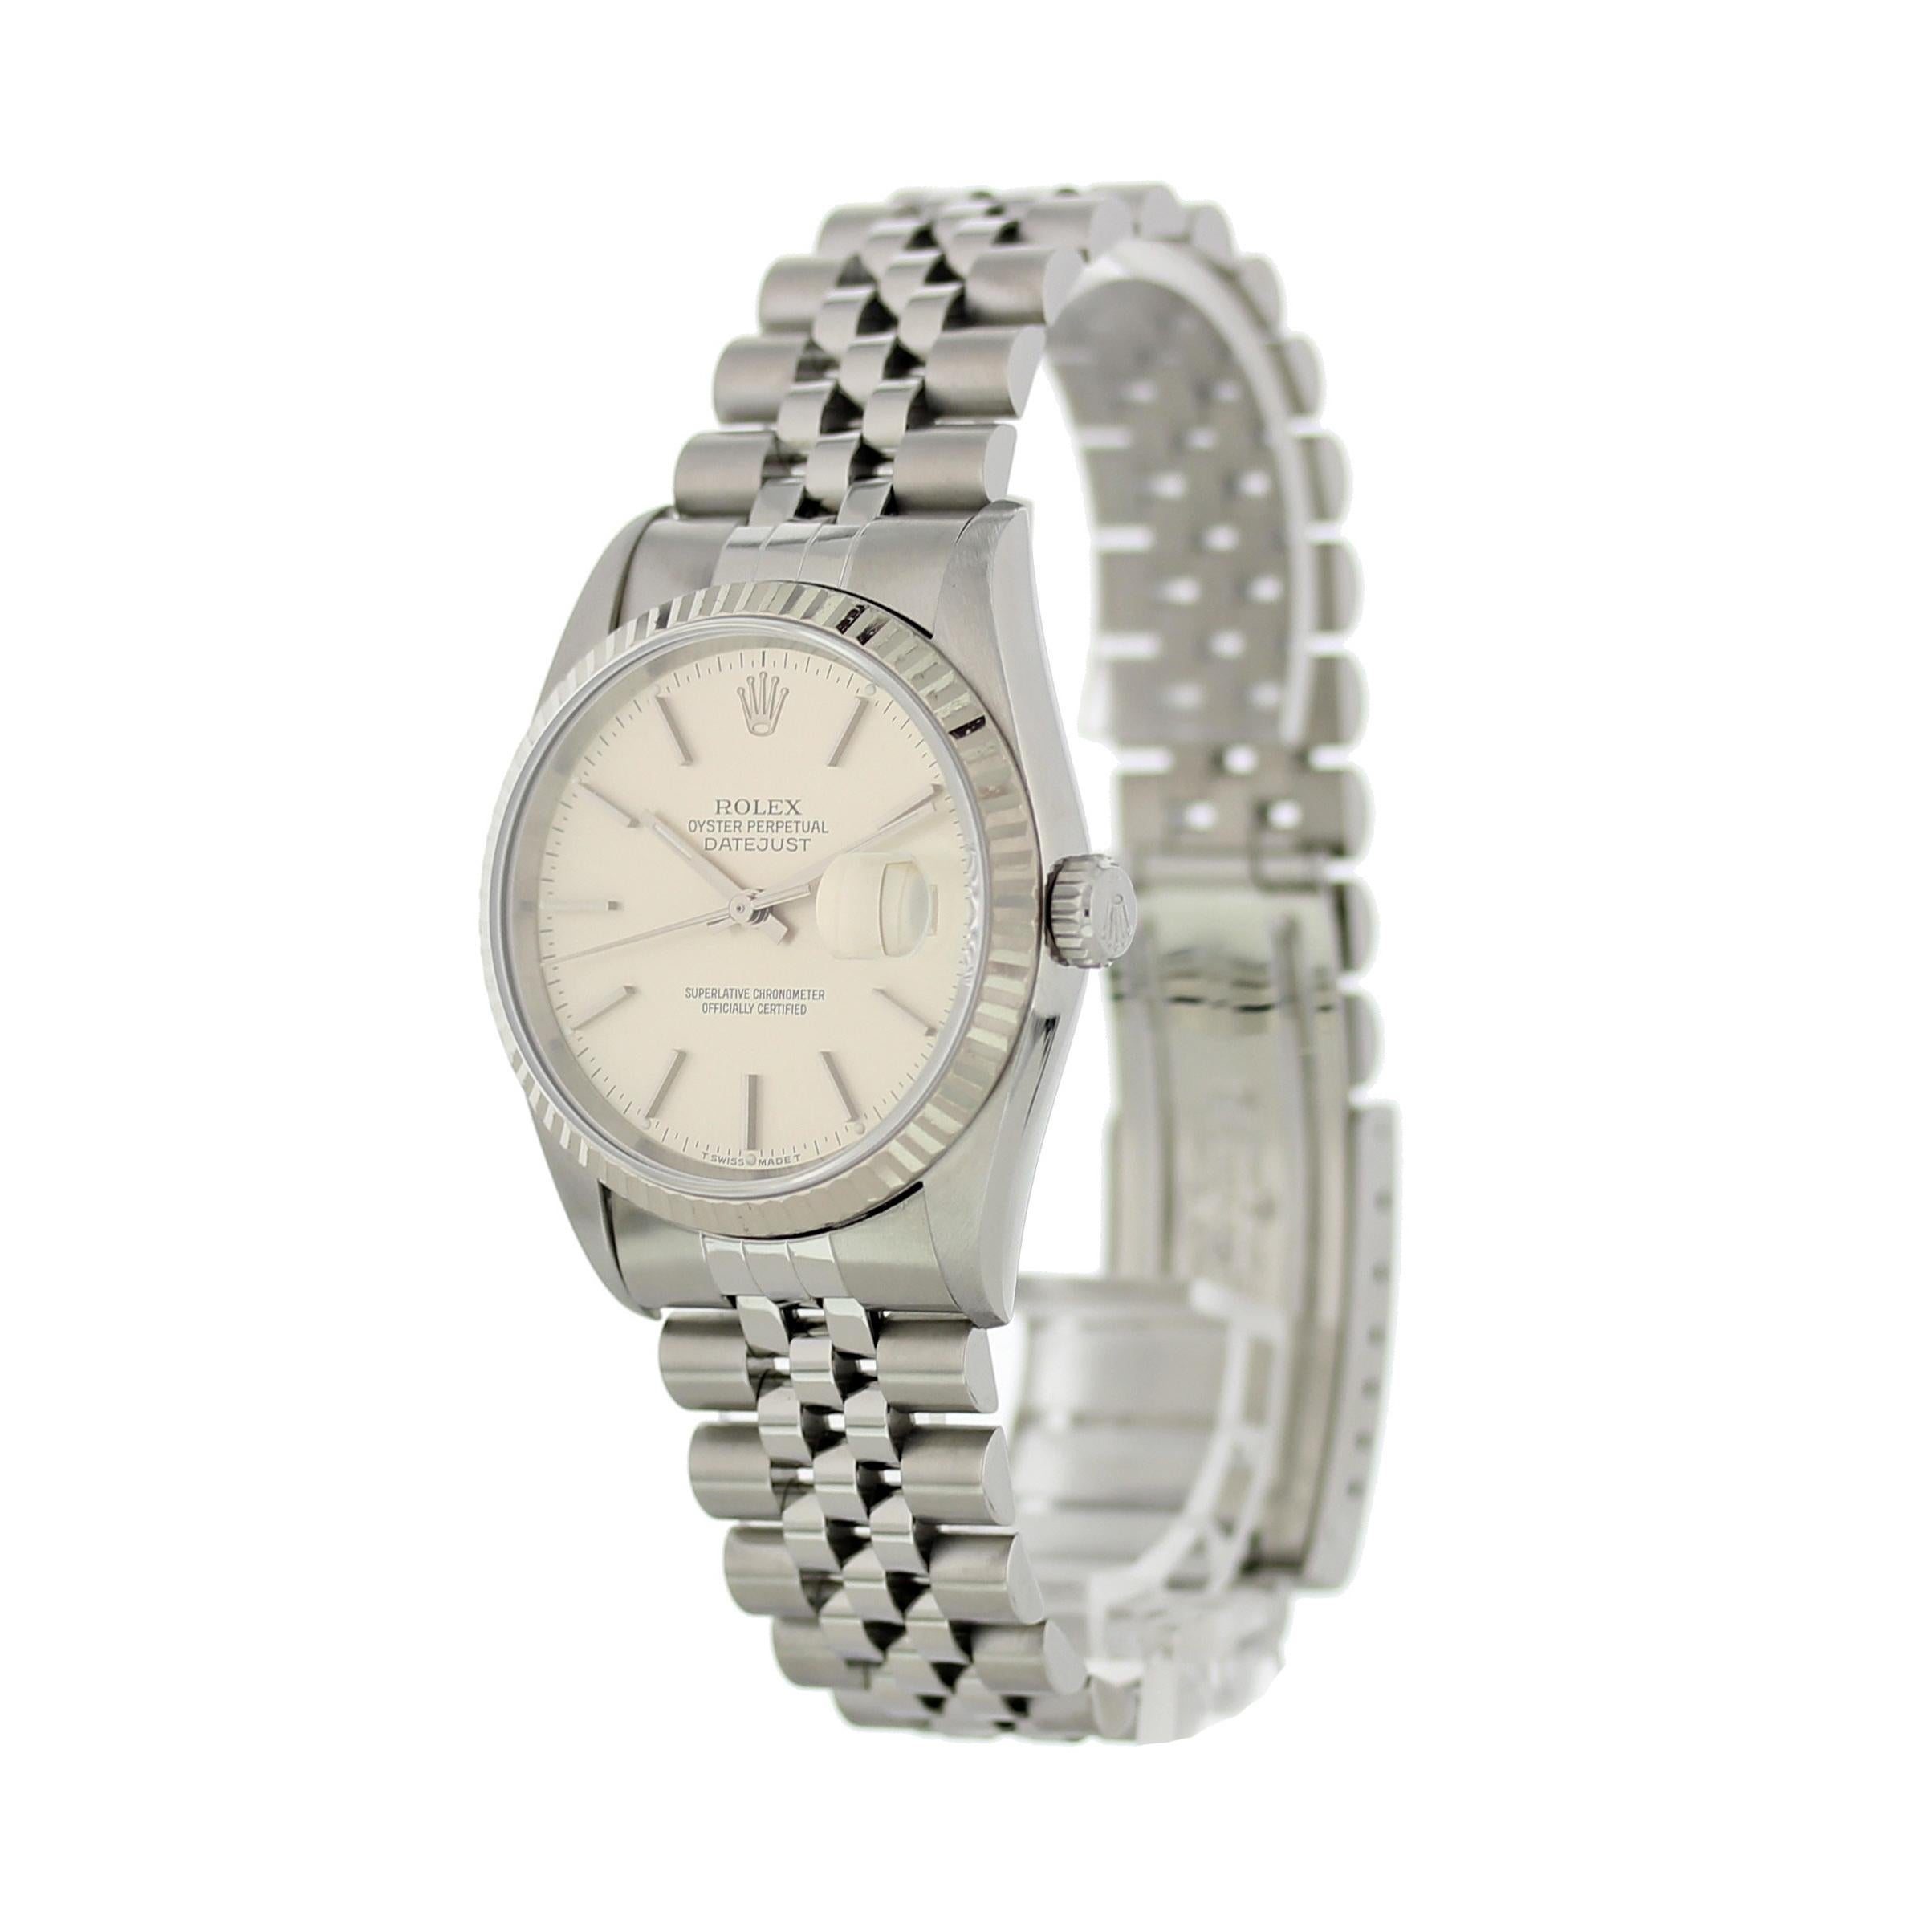 Rolex Oyster Perpetual Datejust 16234 Mens Watch.
36mm Stainless Steel case. 
White Gold Stationary bezel. 
Silver dial with Luminous Steel hands and index hour markers. 
Minute markers on the outer dial. 
Date display at the 3 o'clock position.